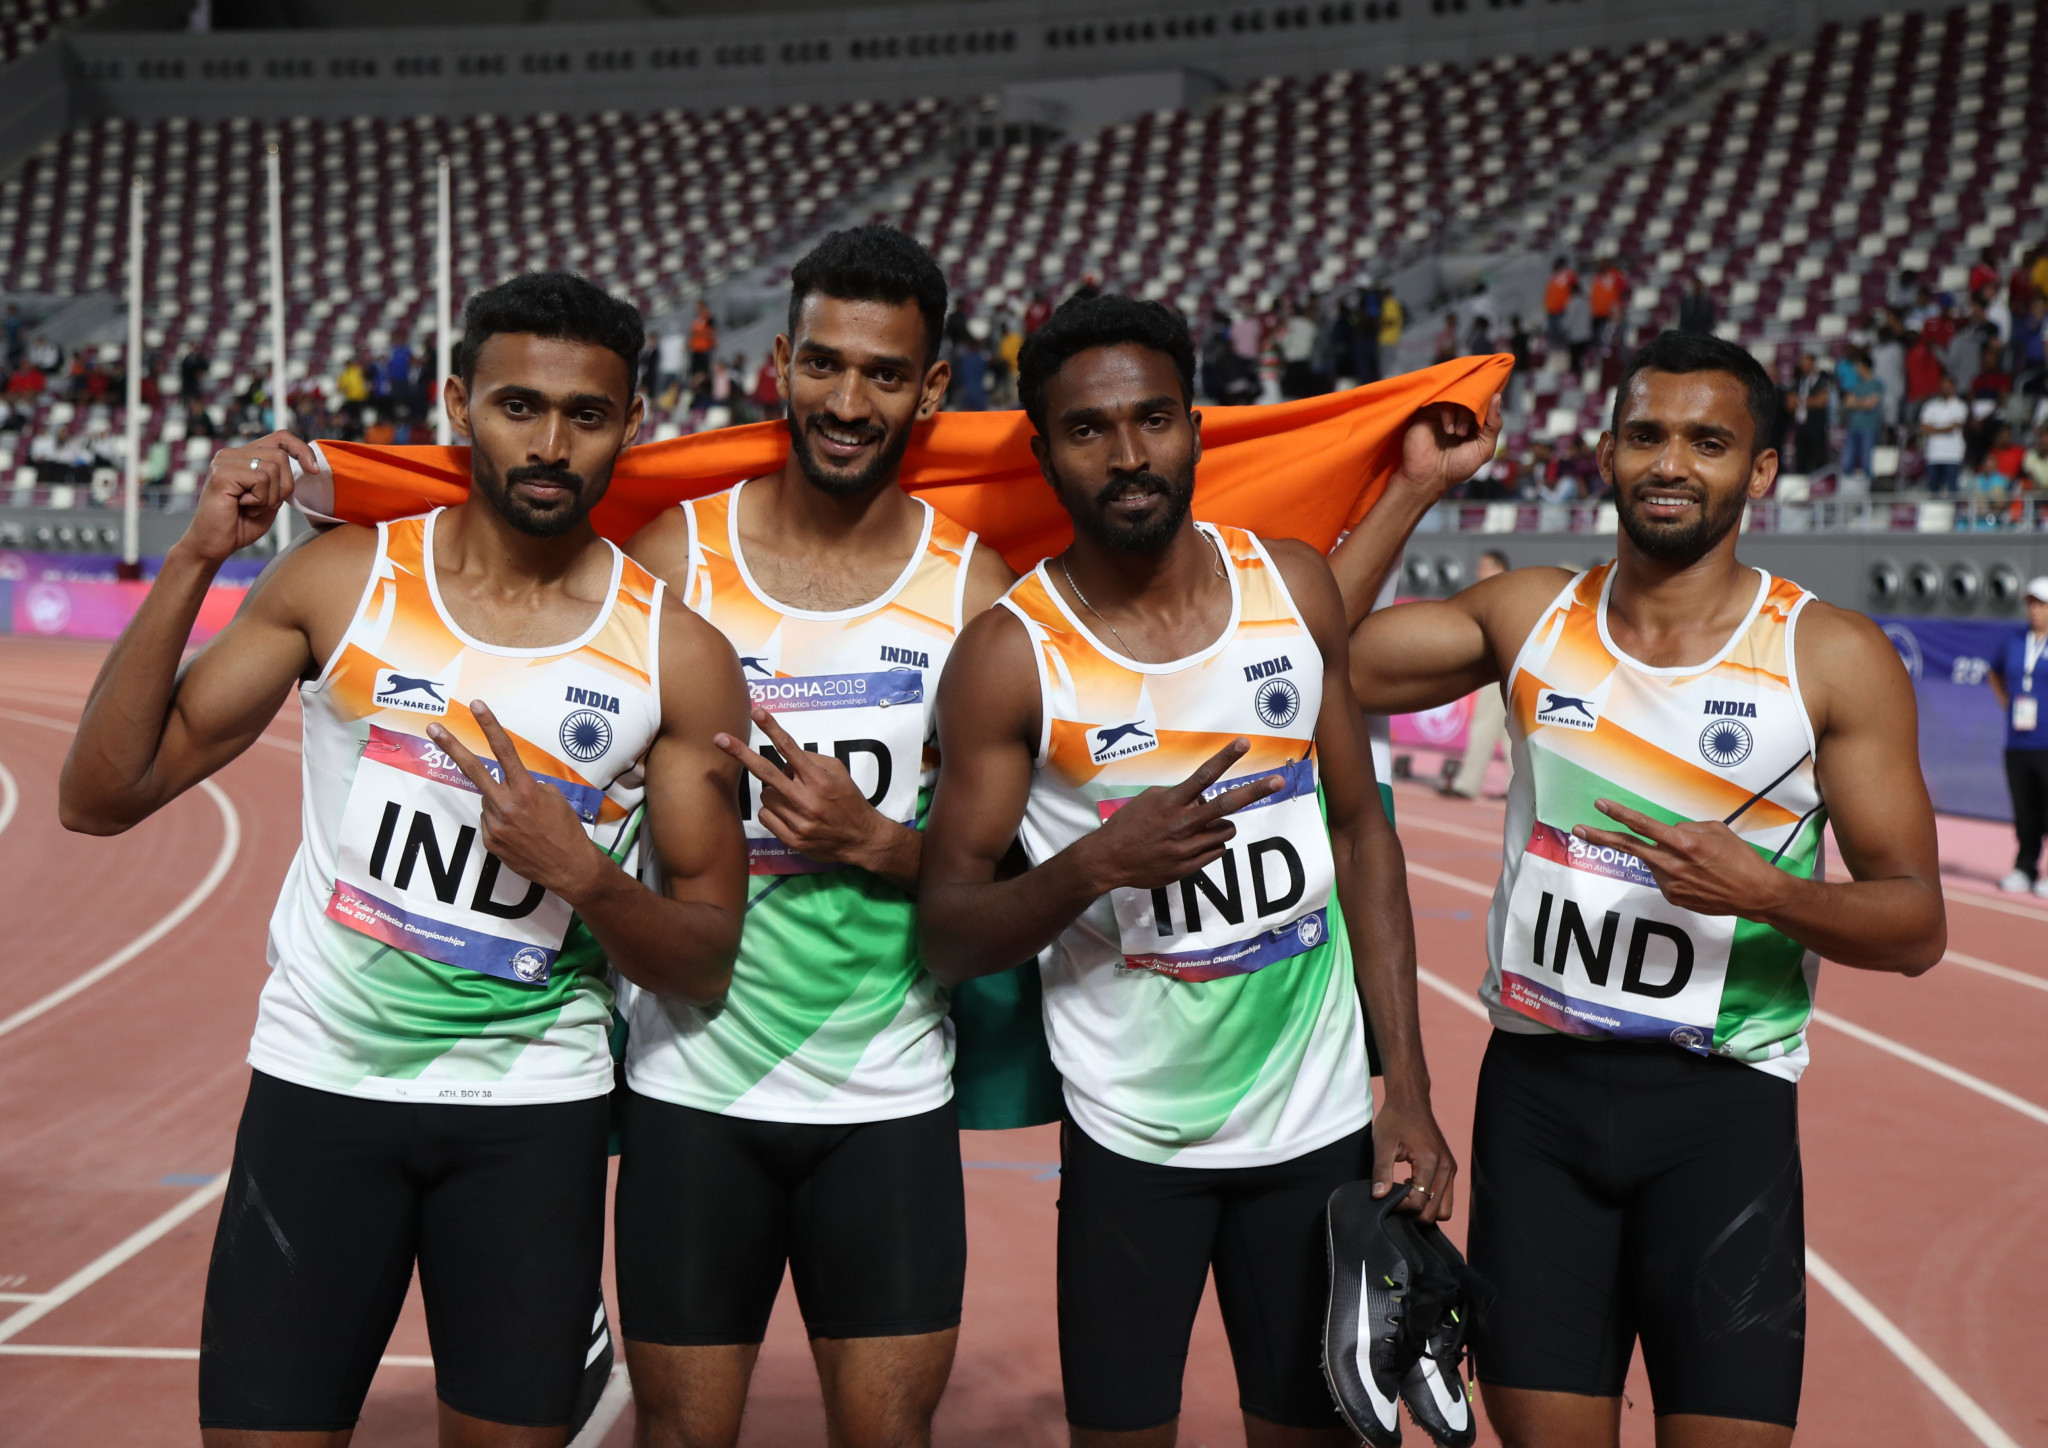 India will be unable to compete at the World Athletics Relays in Poland ©Getty Images